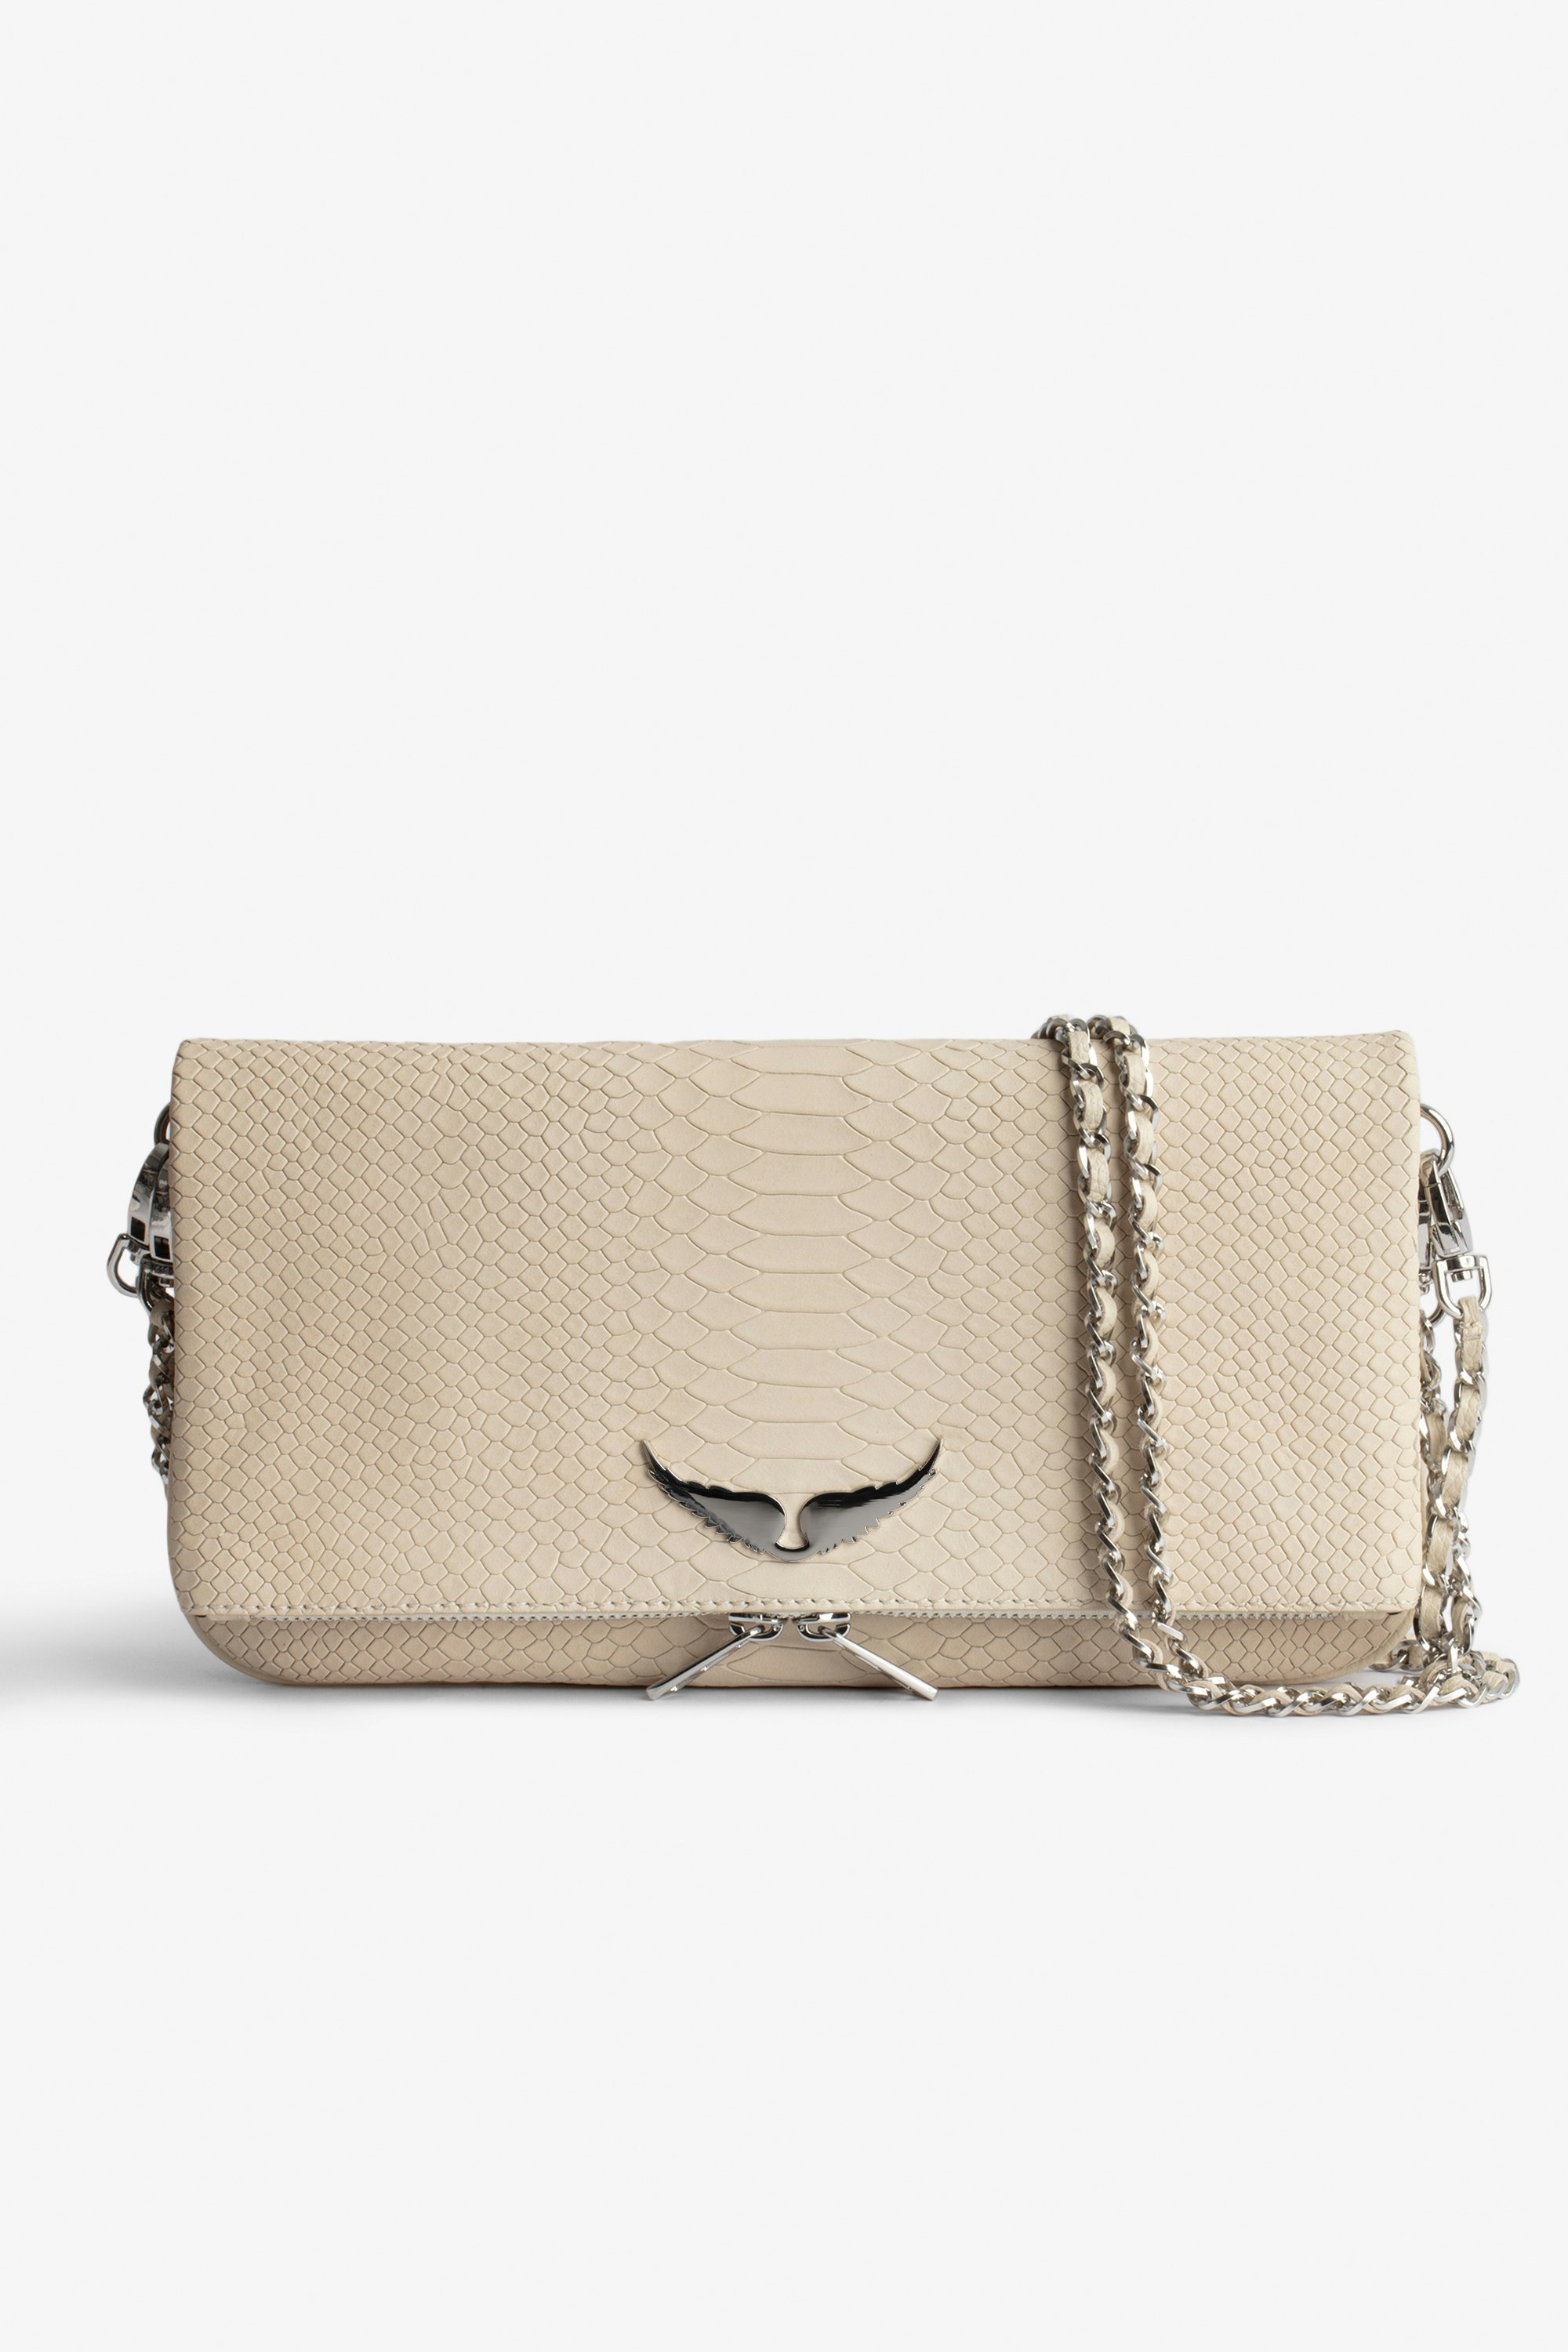 Soft Savage Rock Clutch - Women’s clutch in ecru python-effect leather with double leather-and-metal chain